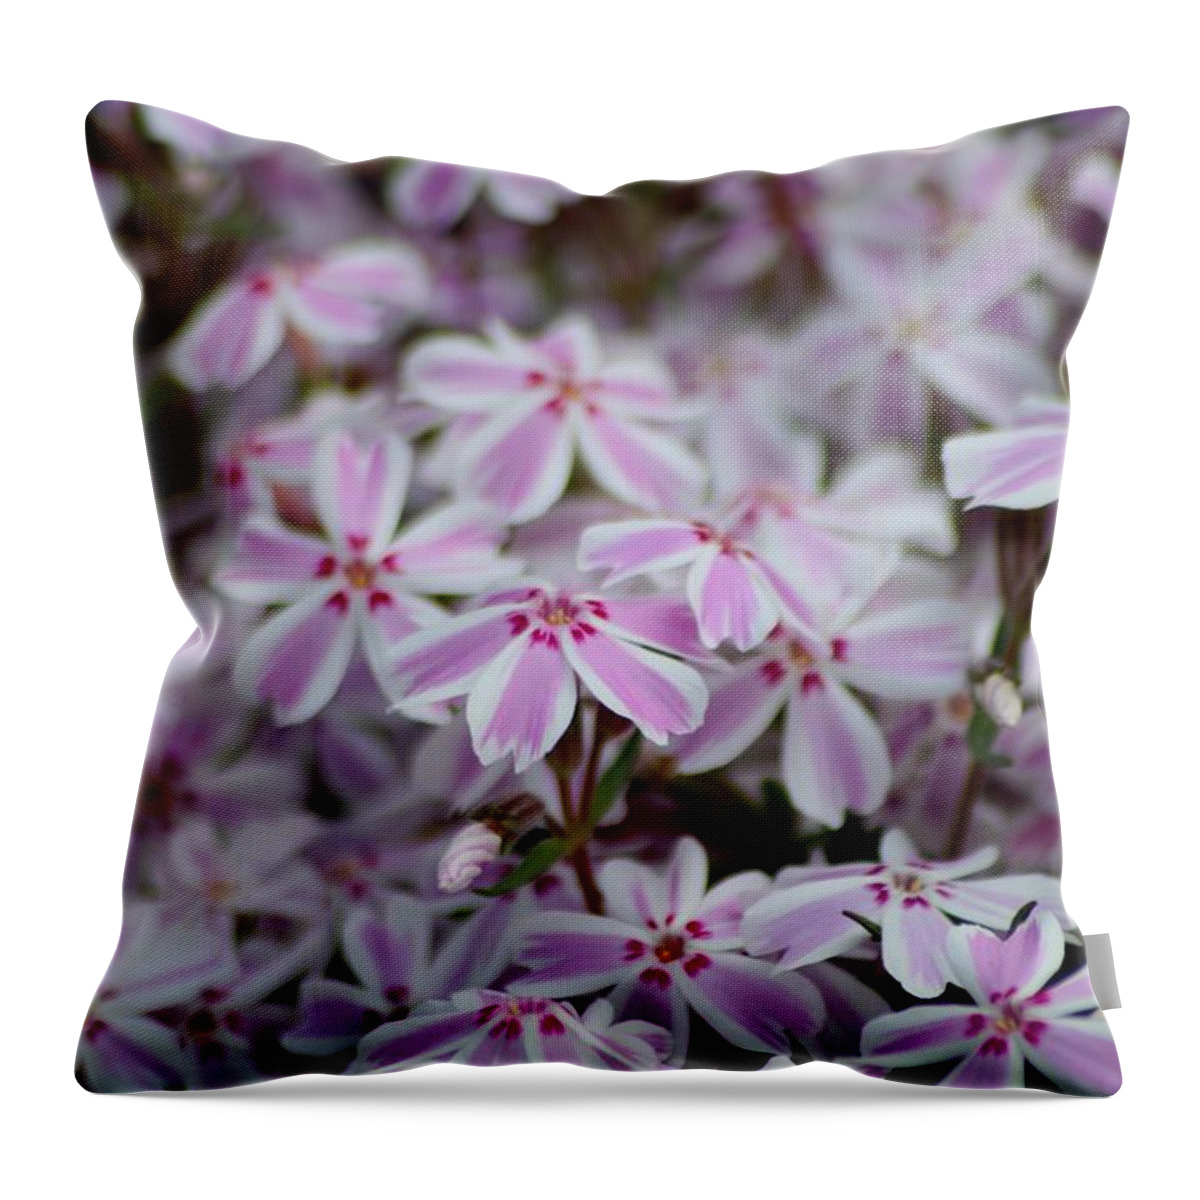 Candy Stripe Phlox Throw Pillow featuring the photograph Candy Stripe Phlox by Living Color Photography Lorraine Lynch